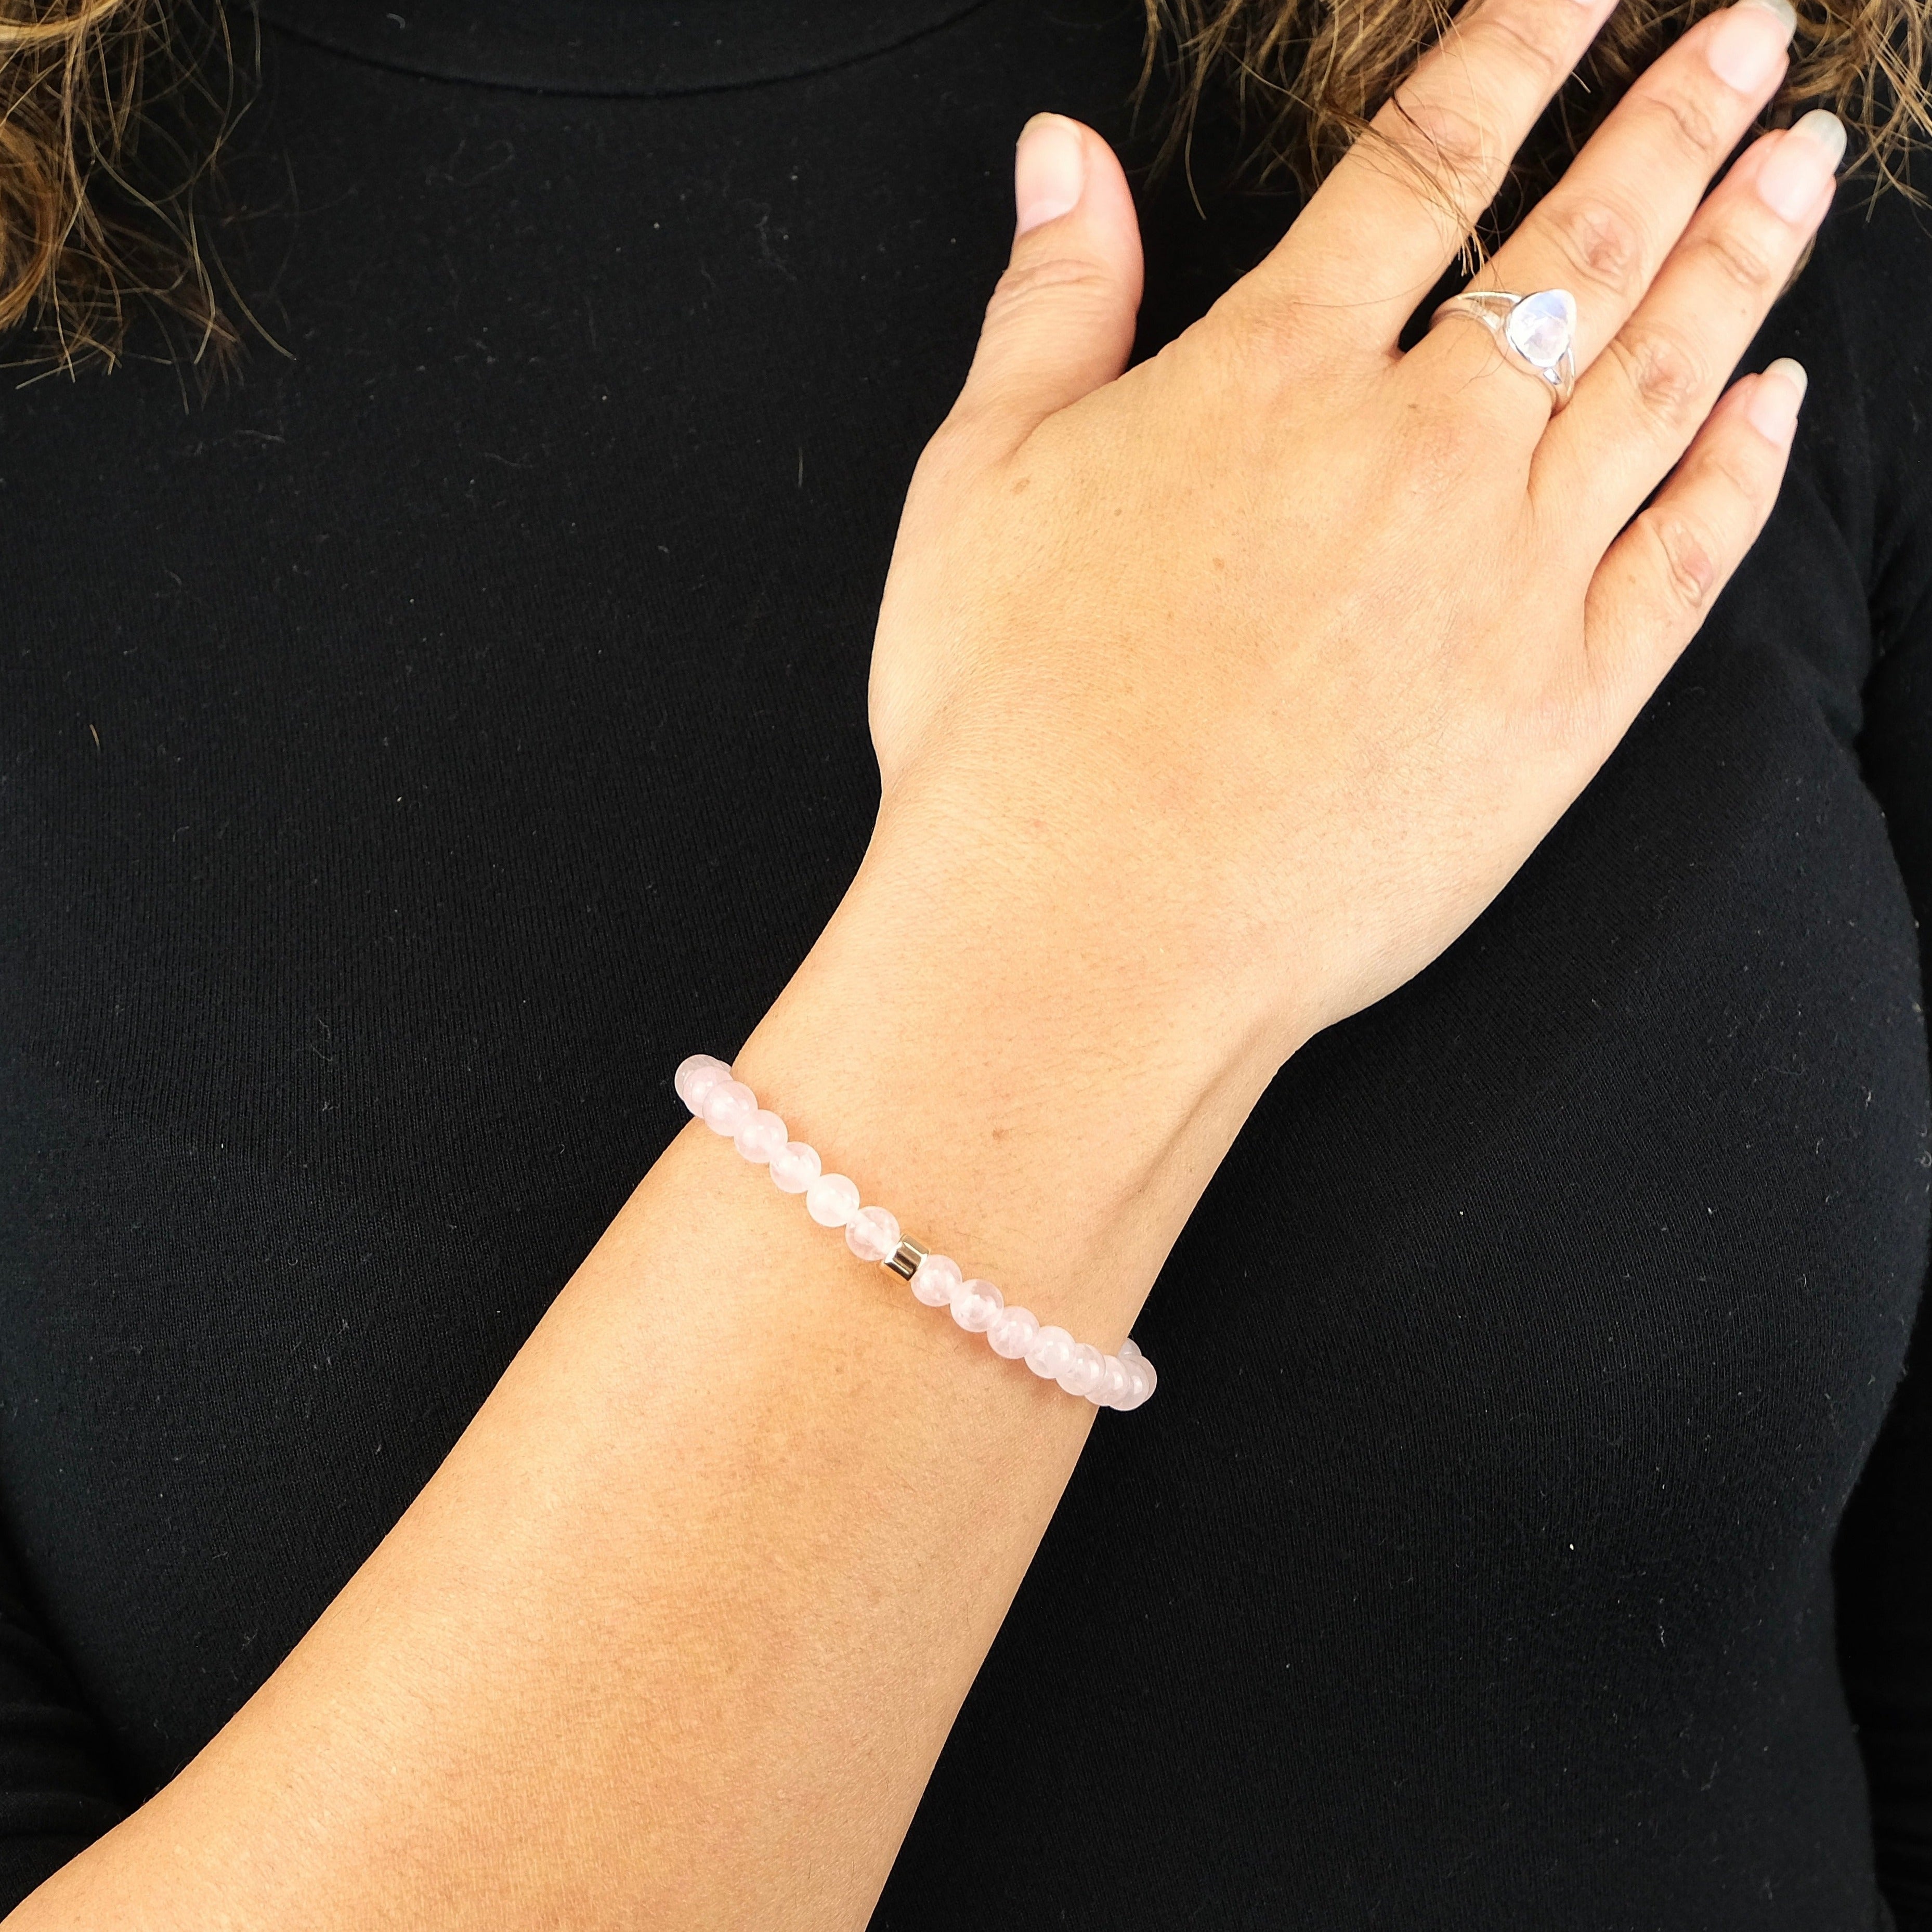 Rose Quartz gemstone bracelet in 6mm beads with 925 sterling silver accent worn on the model's wrist. The model is also wearing a Samayla Jewellery Moonstone teardrop gemstone ring.